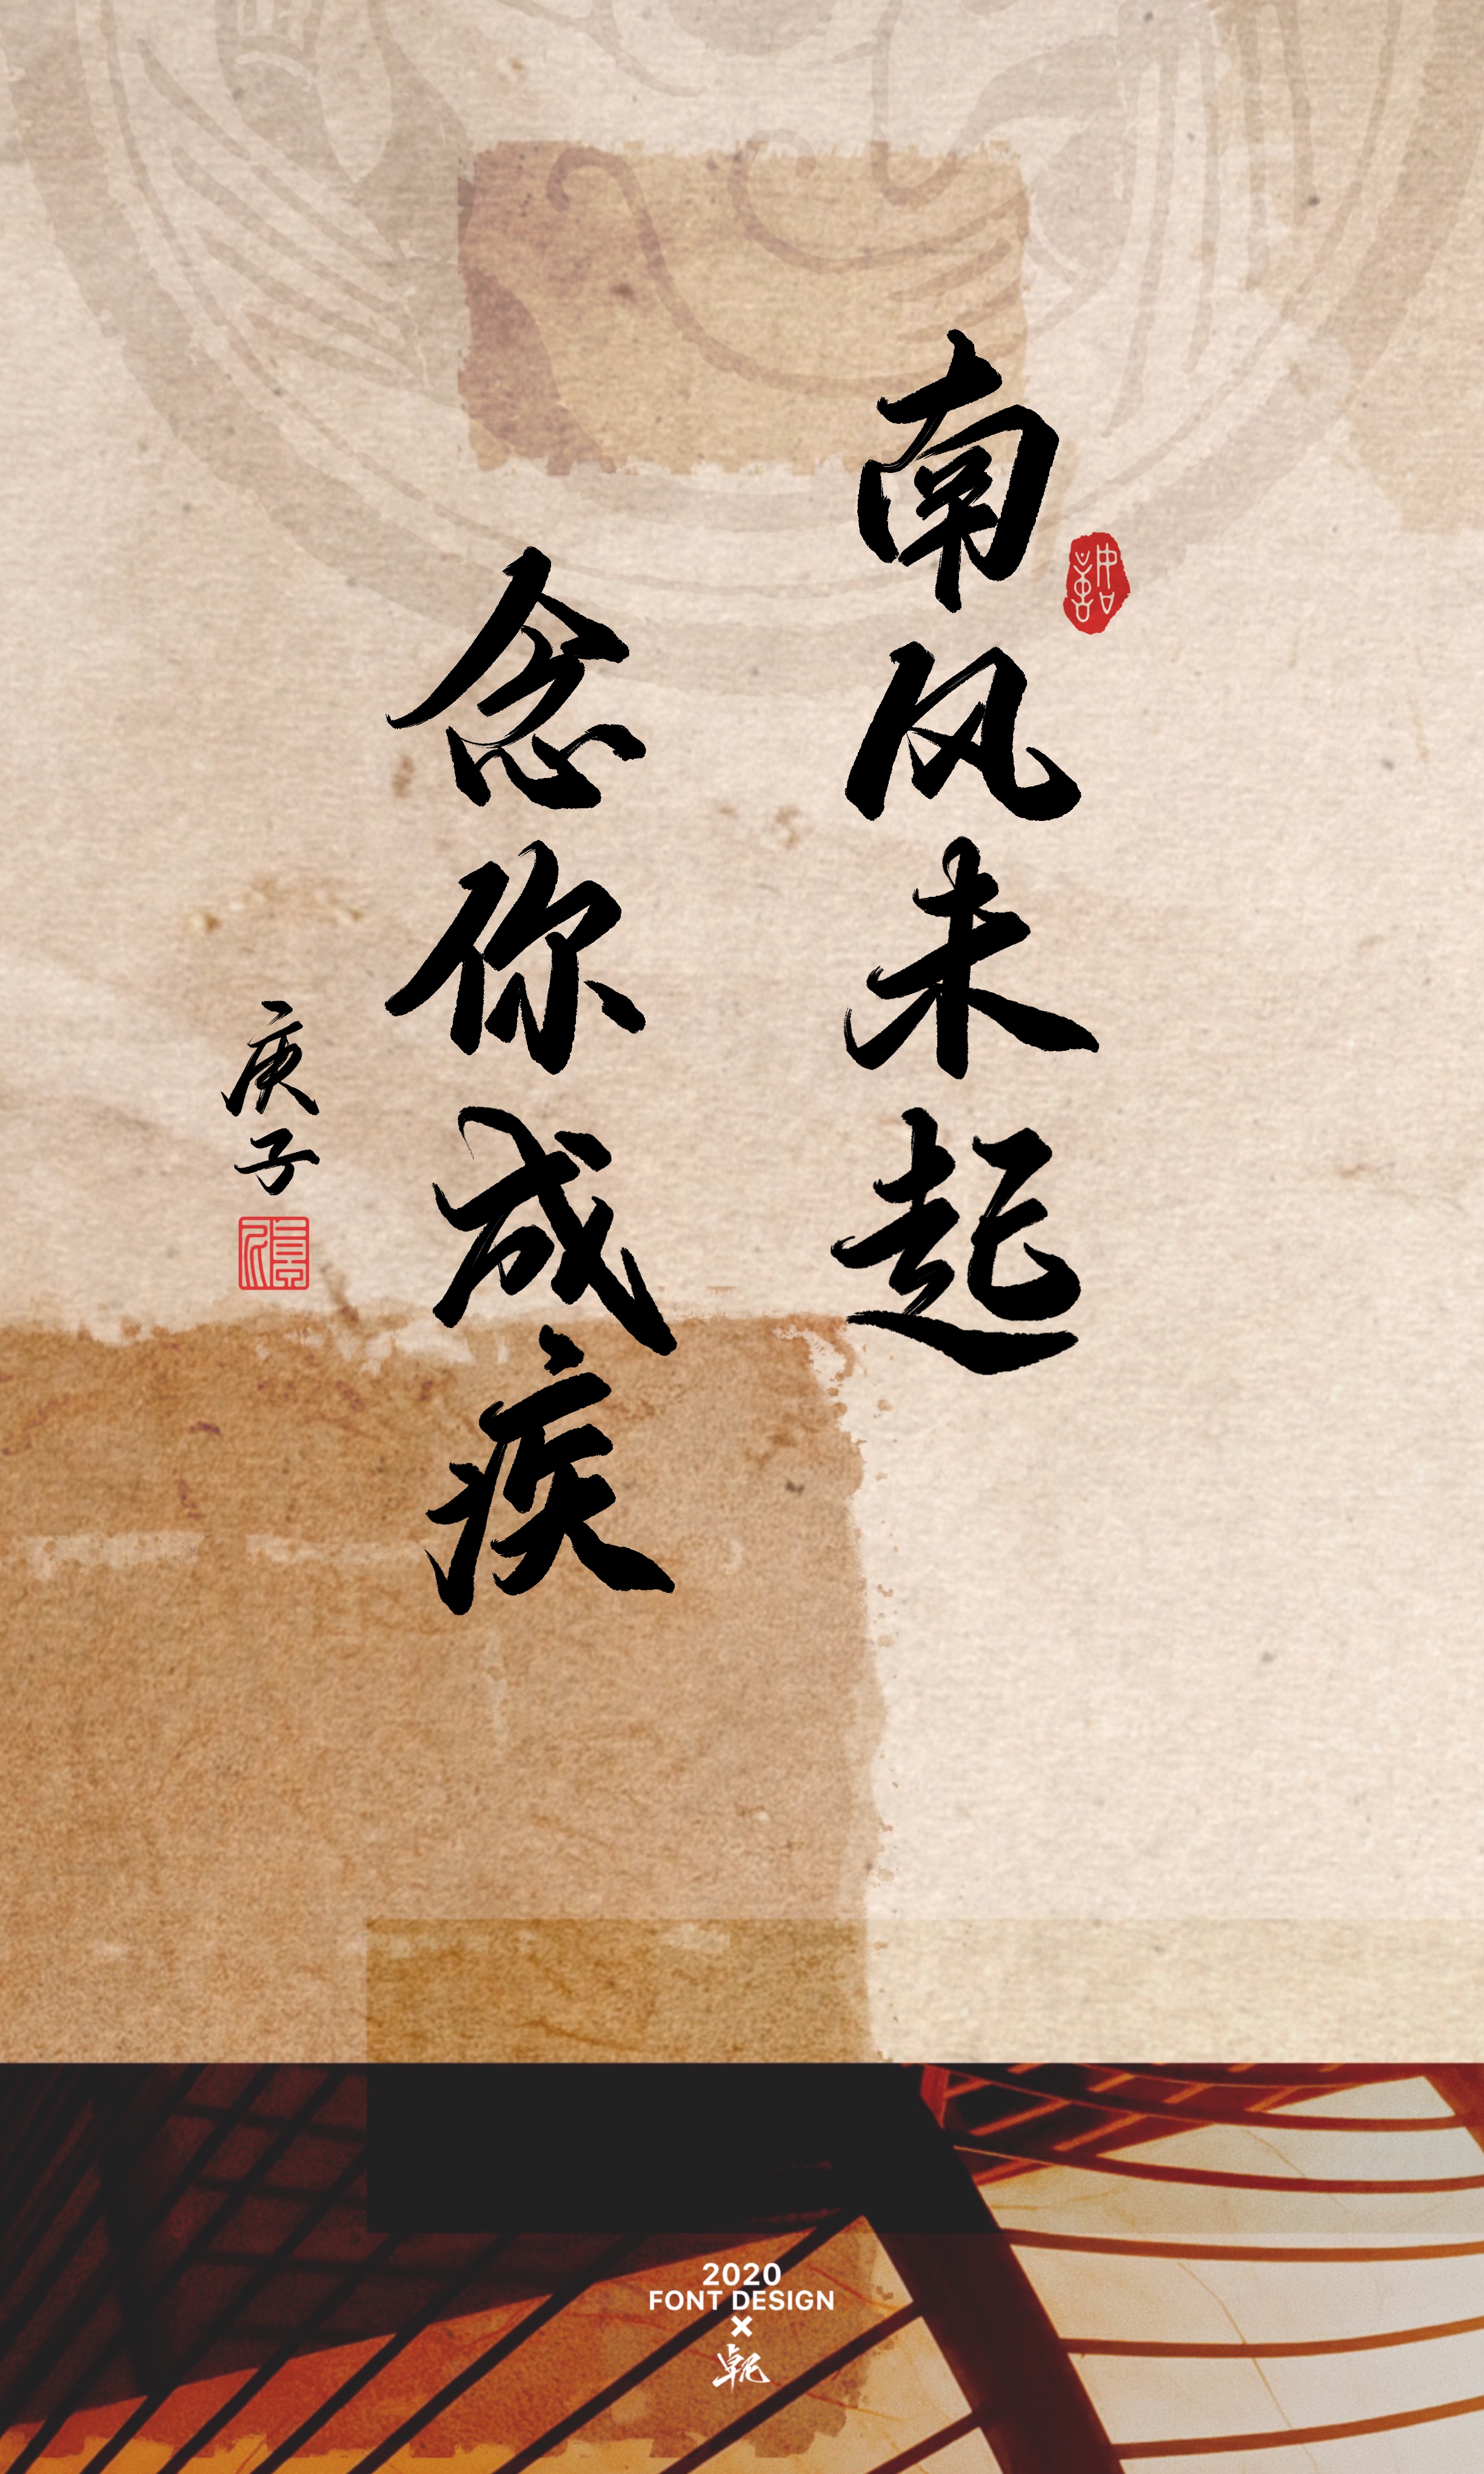 Interesting Chinese Creative Font Design-The Collision between Elegant Classical Chinese and Modern Chinese